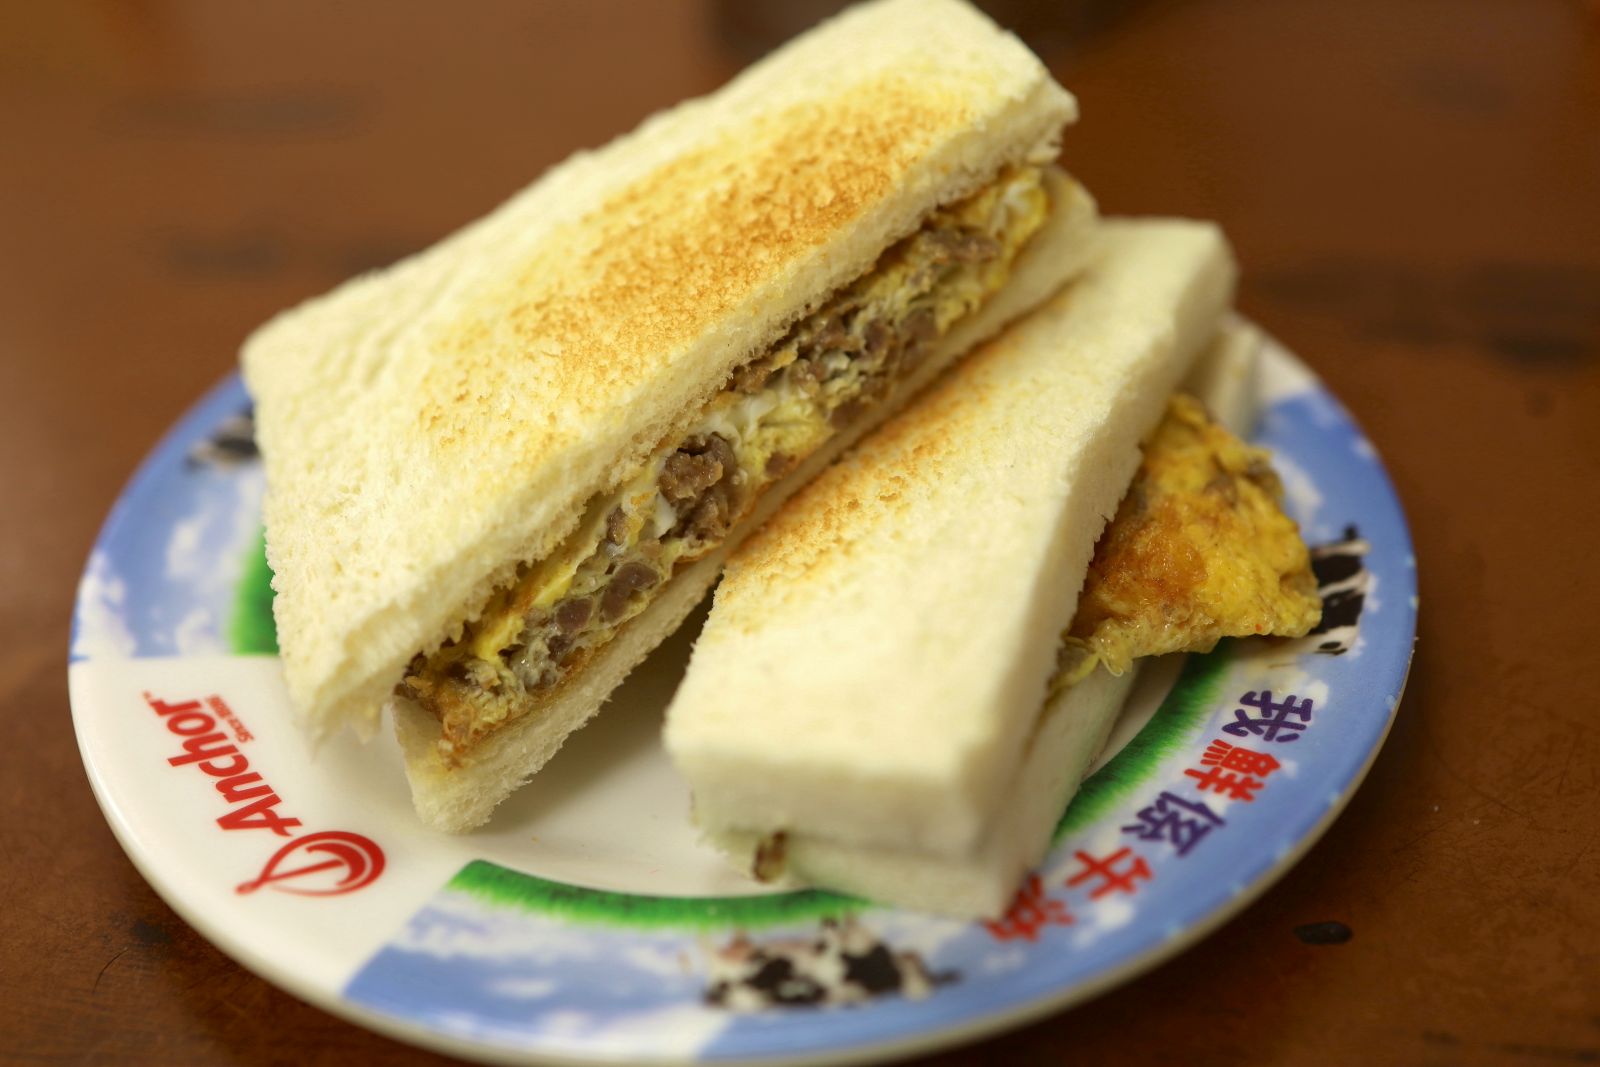  Egg and beef sandwich (牛蛋治)